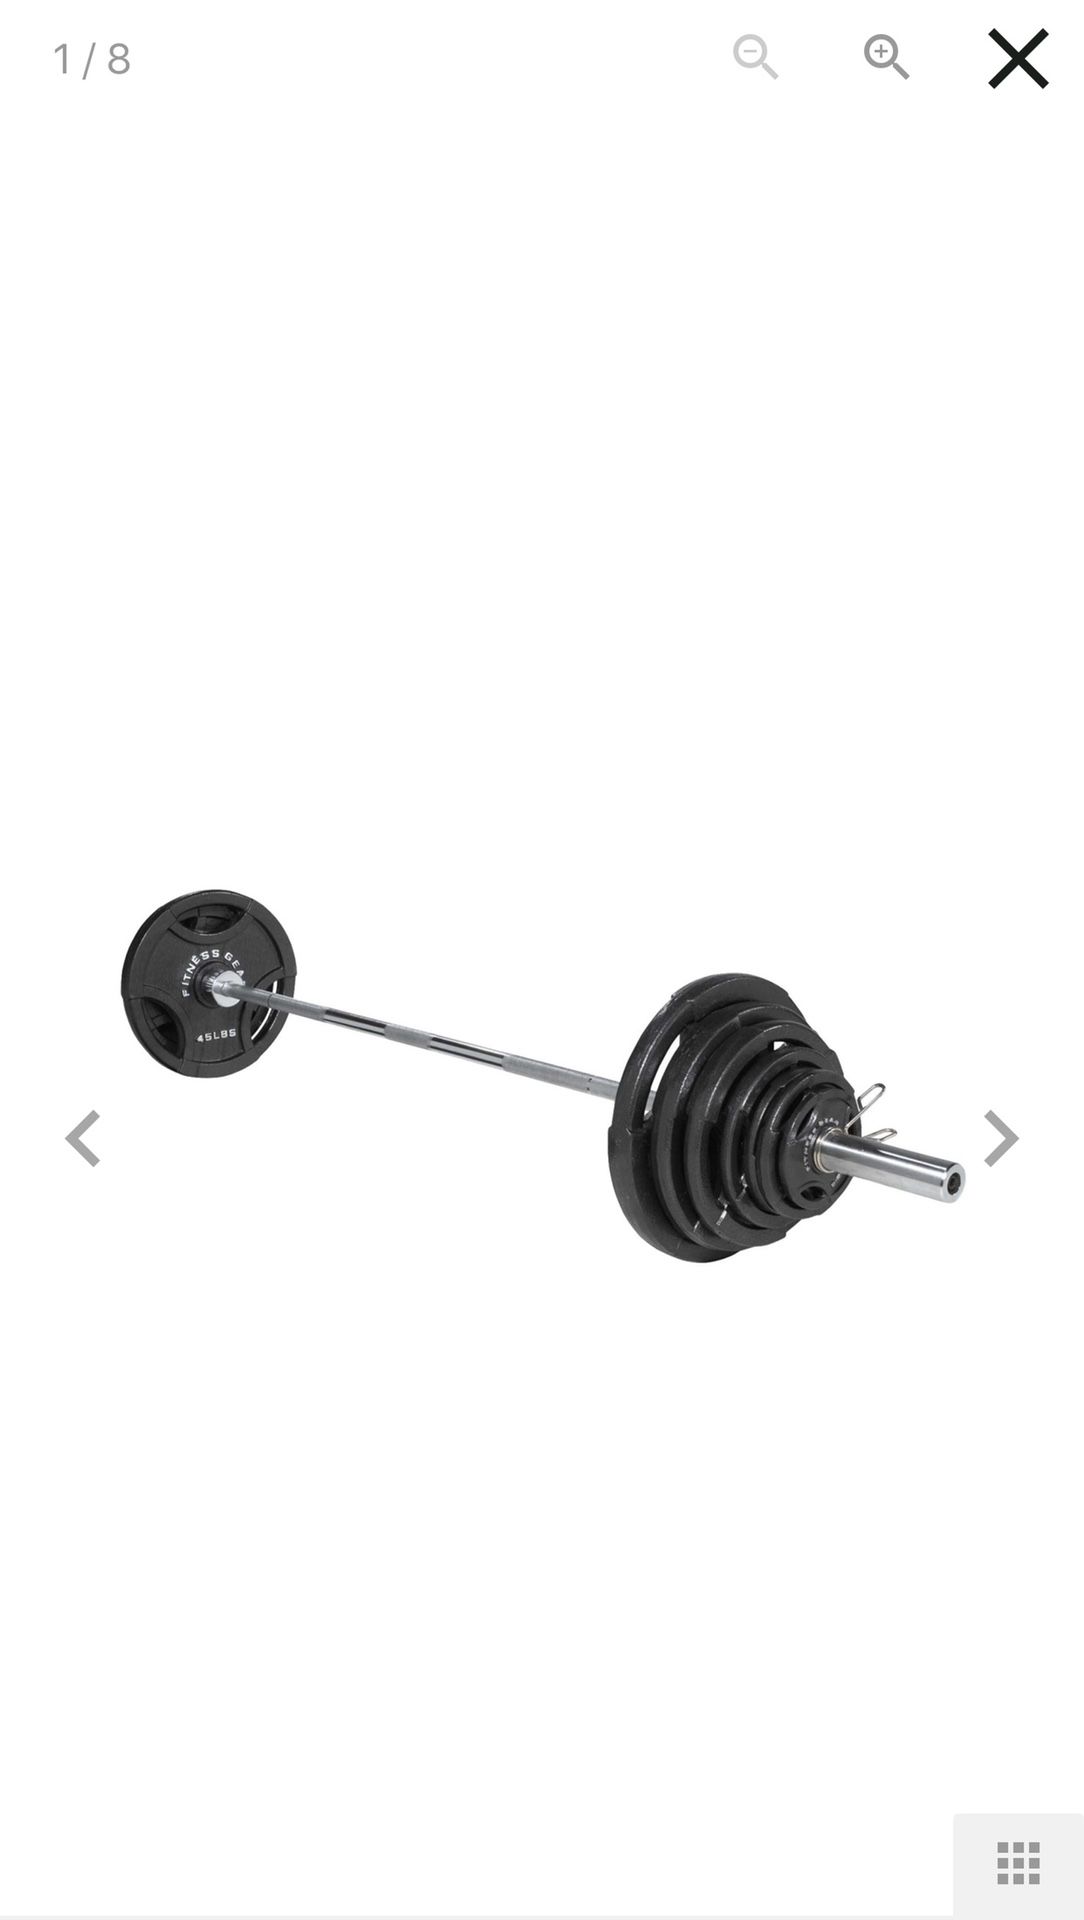 300lb Olympic weight set